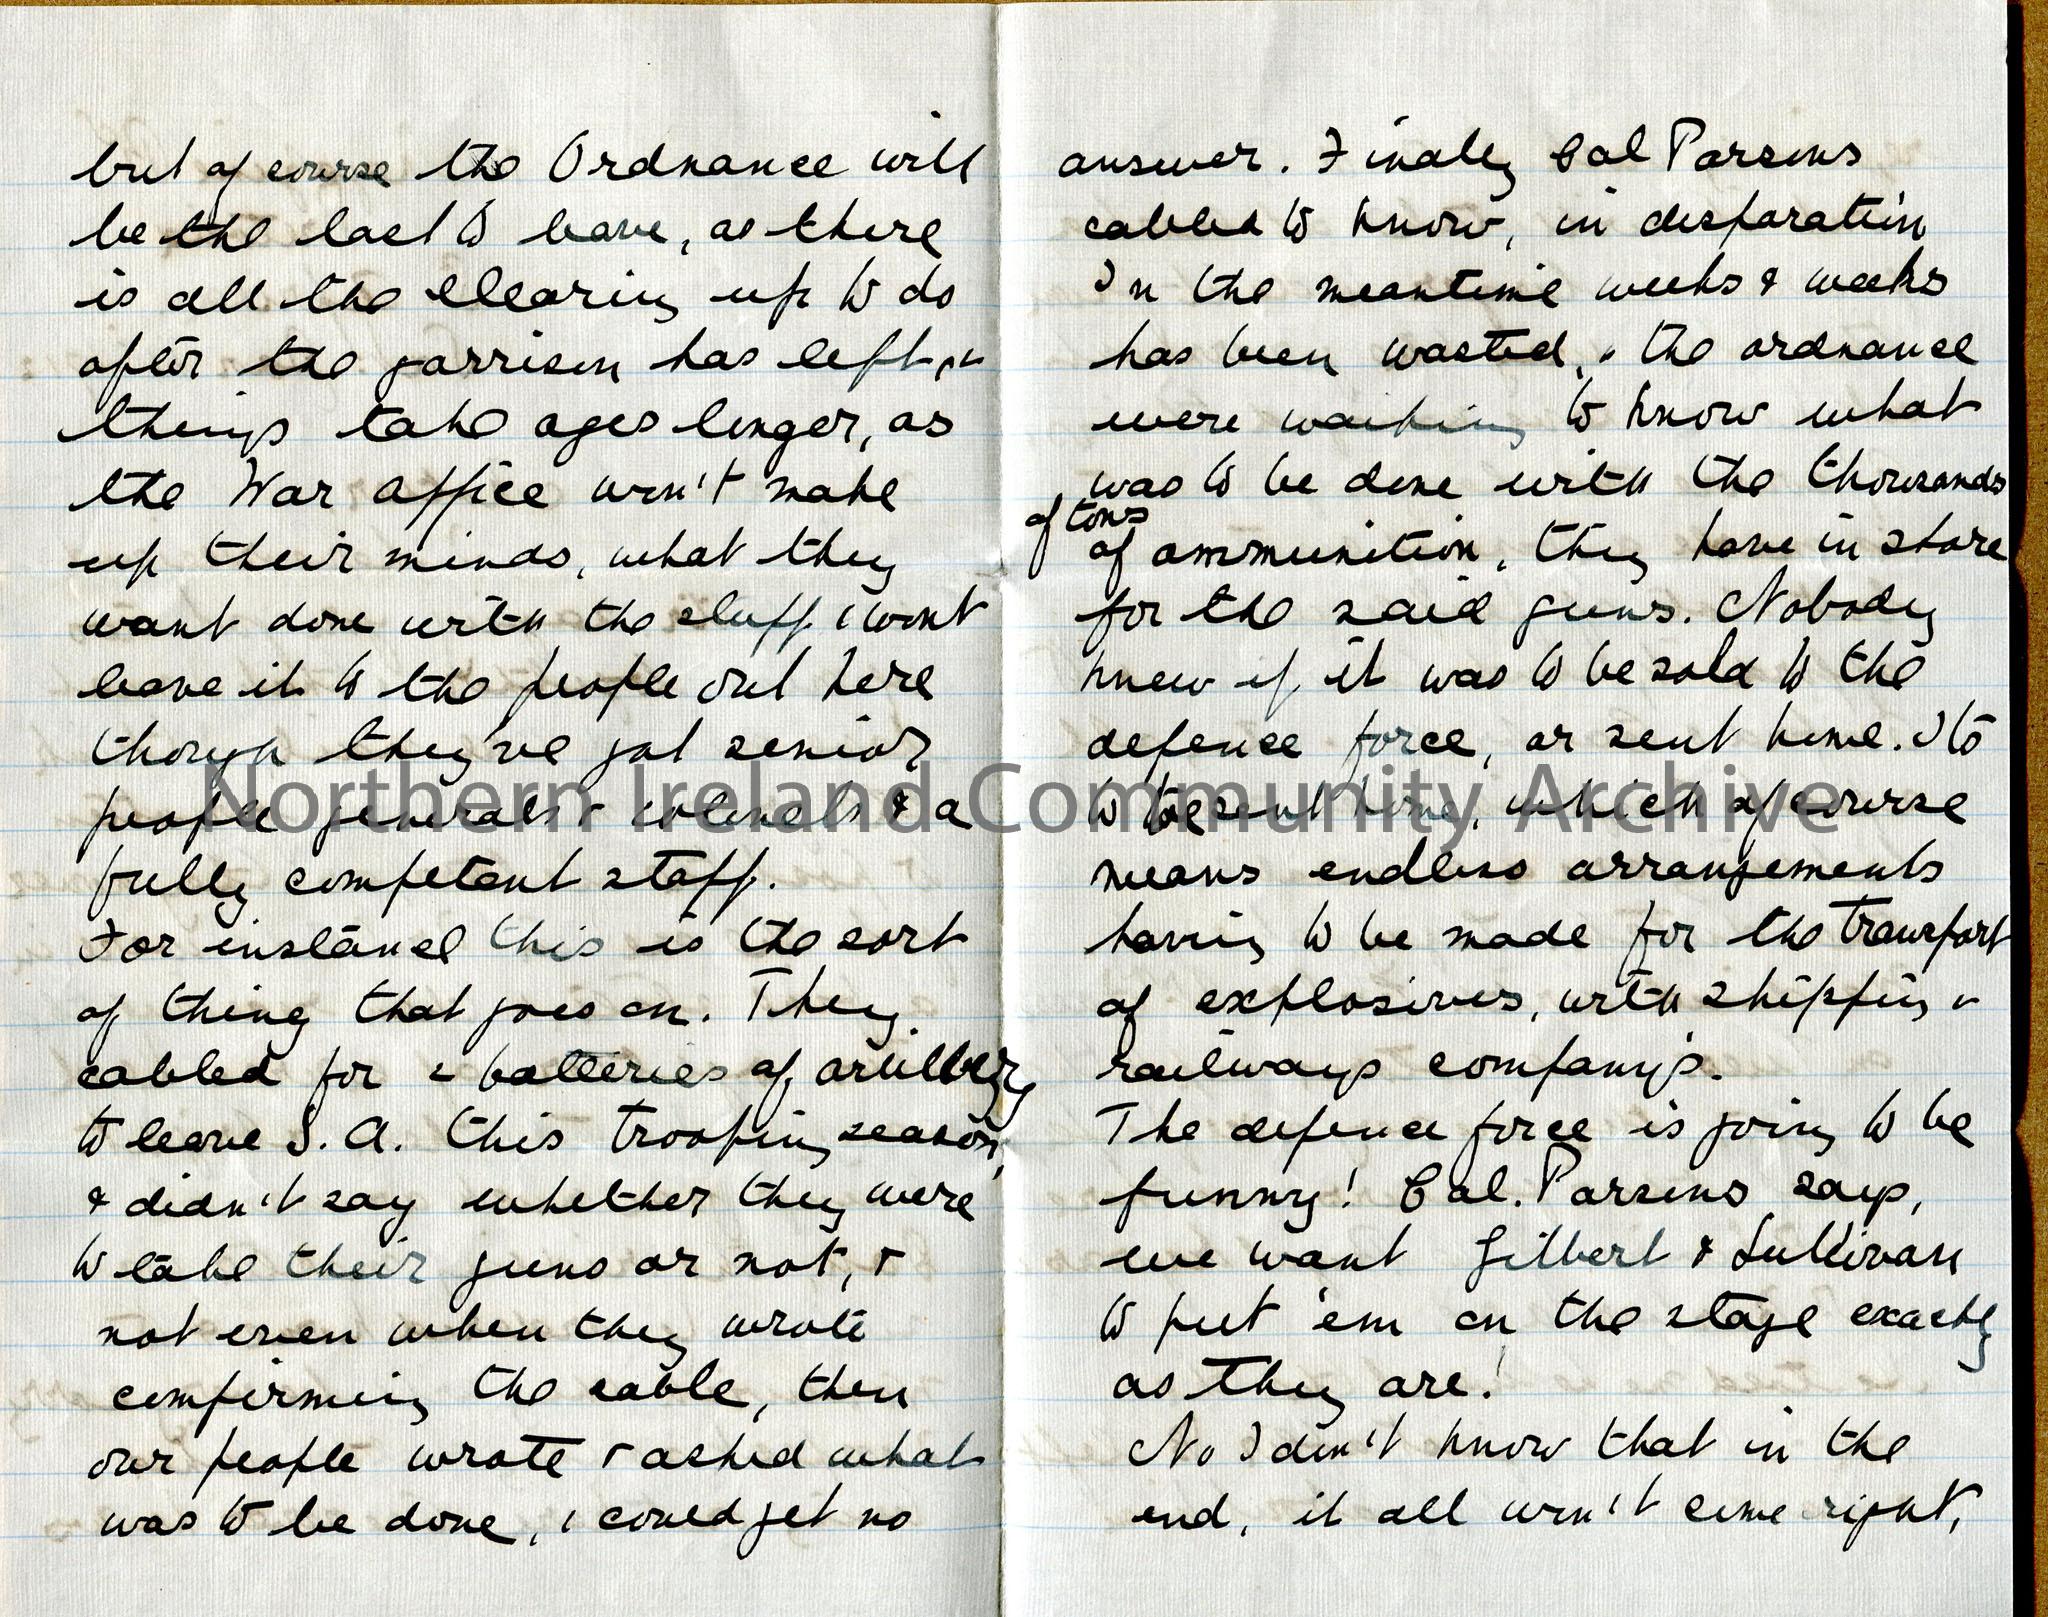 One of 2 double pages of handwritten letter from Dorothy to her mother. Discusses problems with garrison and ammunition transfer/storage, entertainmen… – img018b